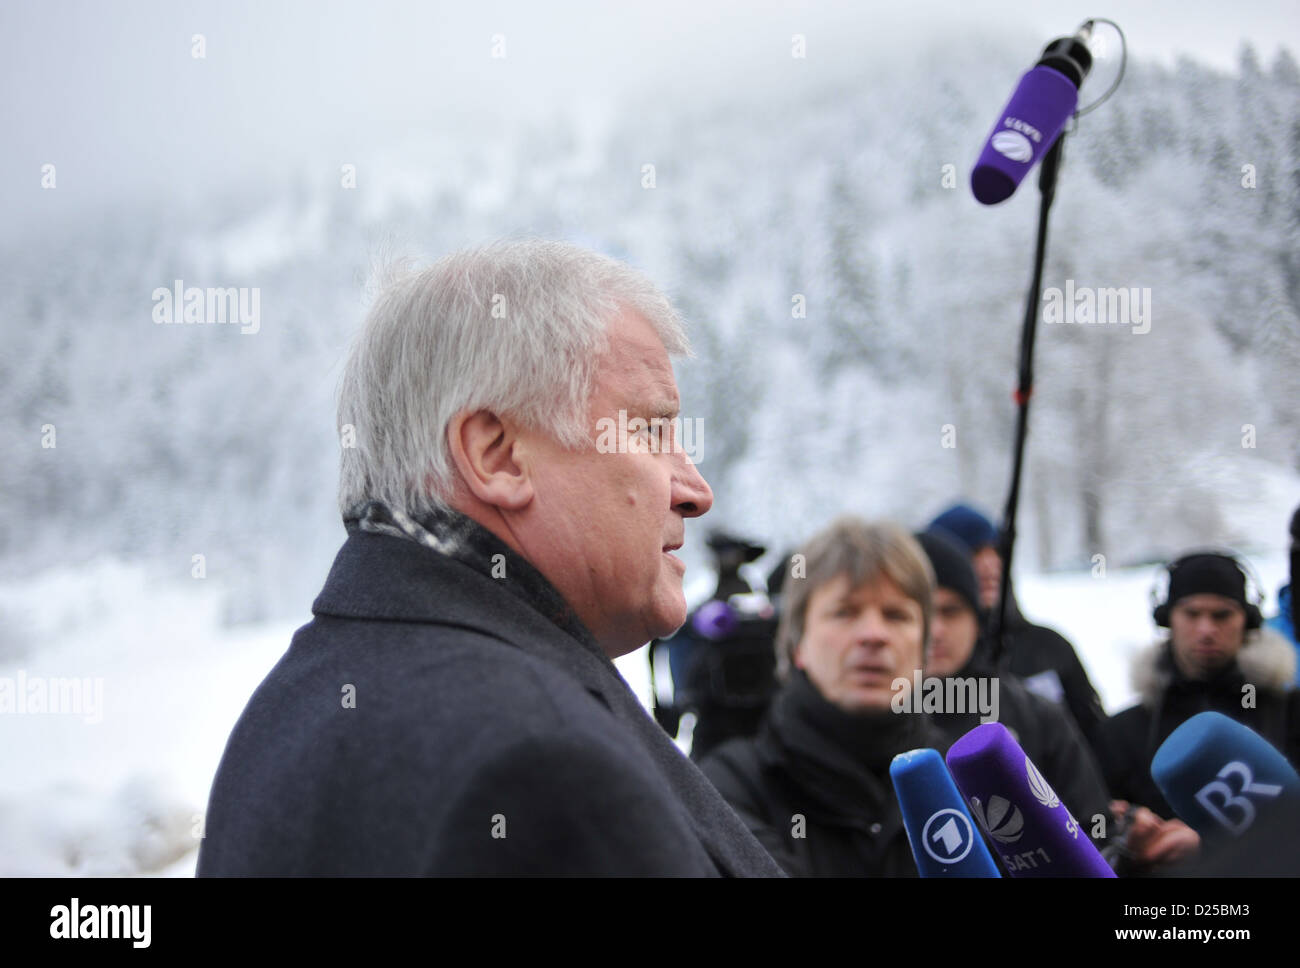 Premier of Bavaria Horst Seehofer (L) makes a press statement before the start of the CSU winter retreat at the Hann-Seidl Foundation in Wildbad Kreuth, Germany, 14 Janaury 2013. Photo: ANDREAS GEBERT Stock Photo